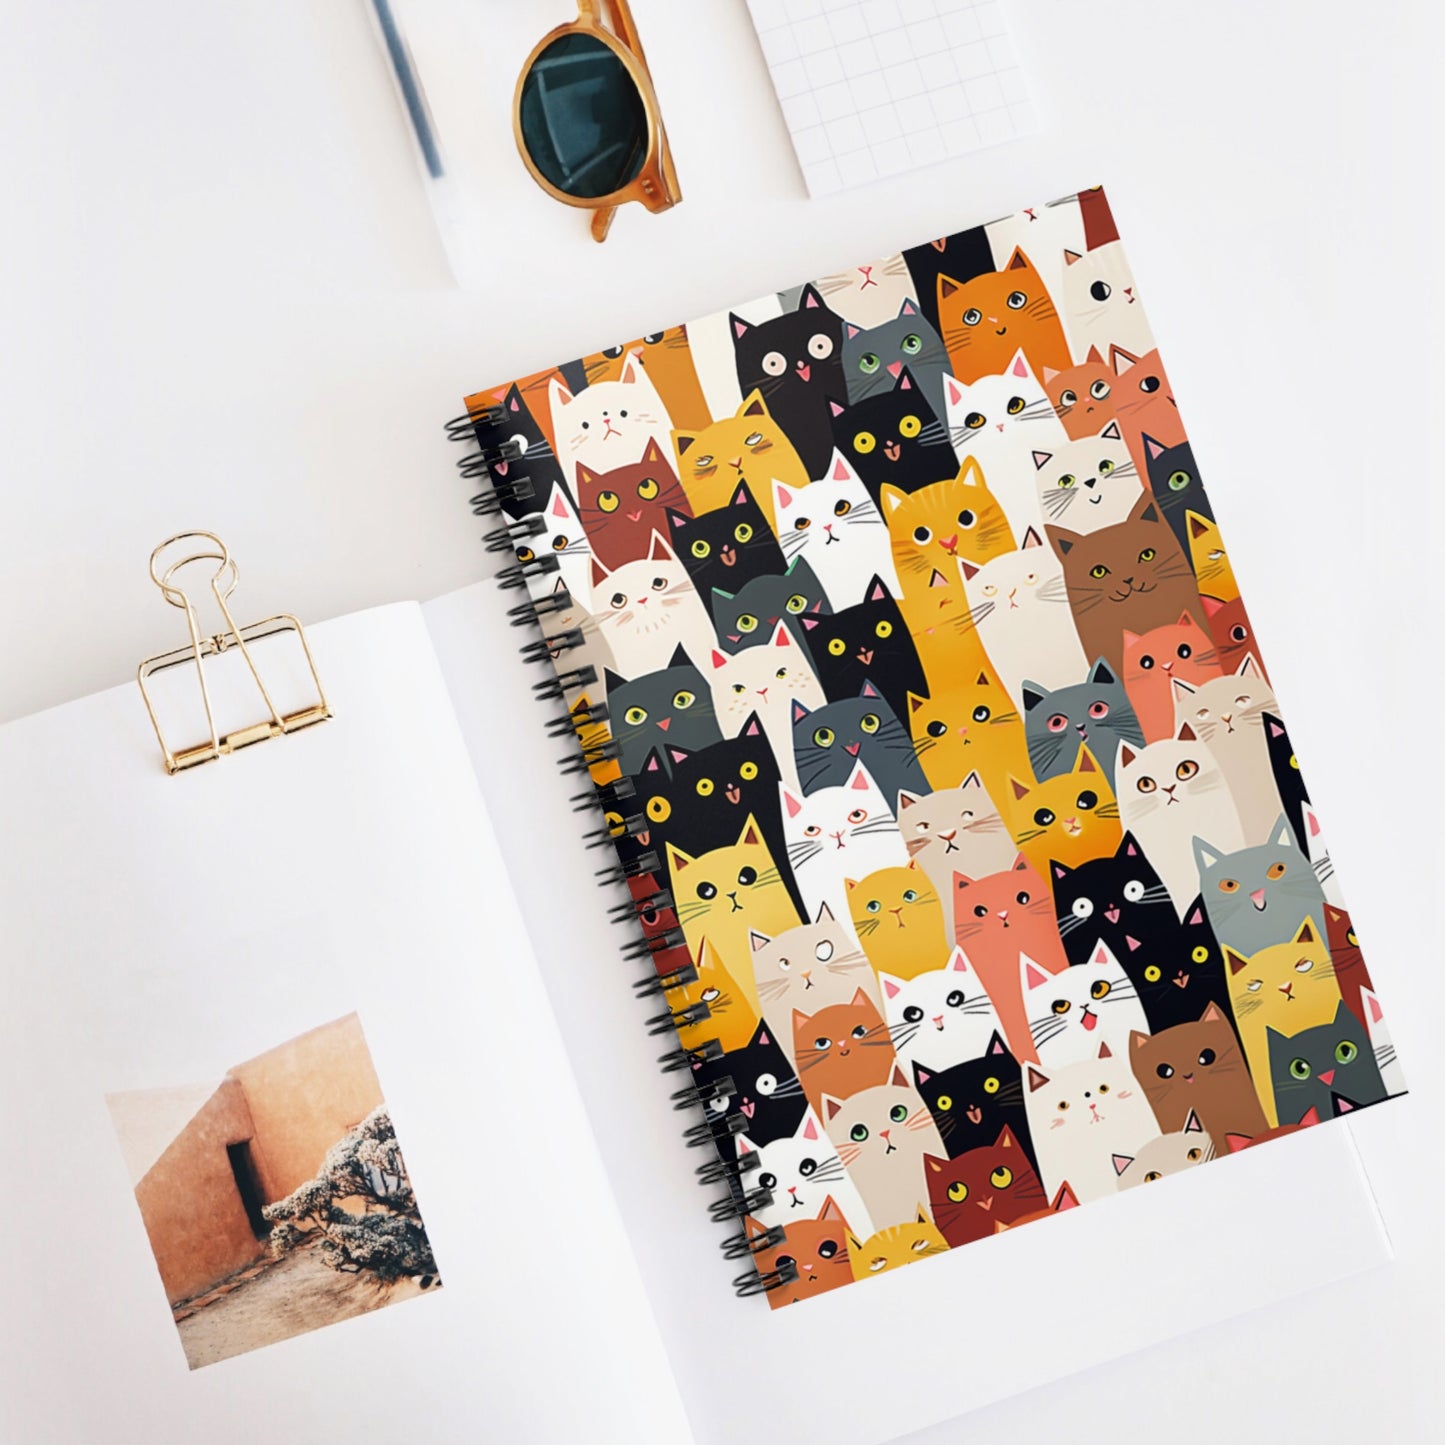 Cats Spiral Notebook, Cute Kittens Travel Pattern Design Small Journal Notepad Ruled Line Book Paper Pad Work Aesthetic Gift